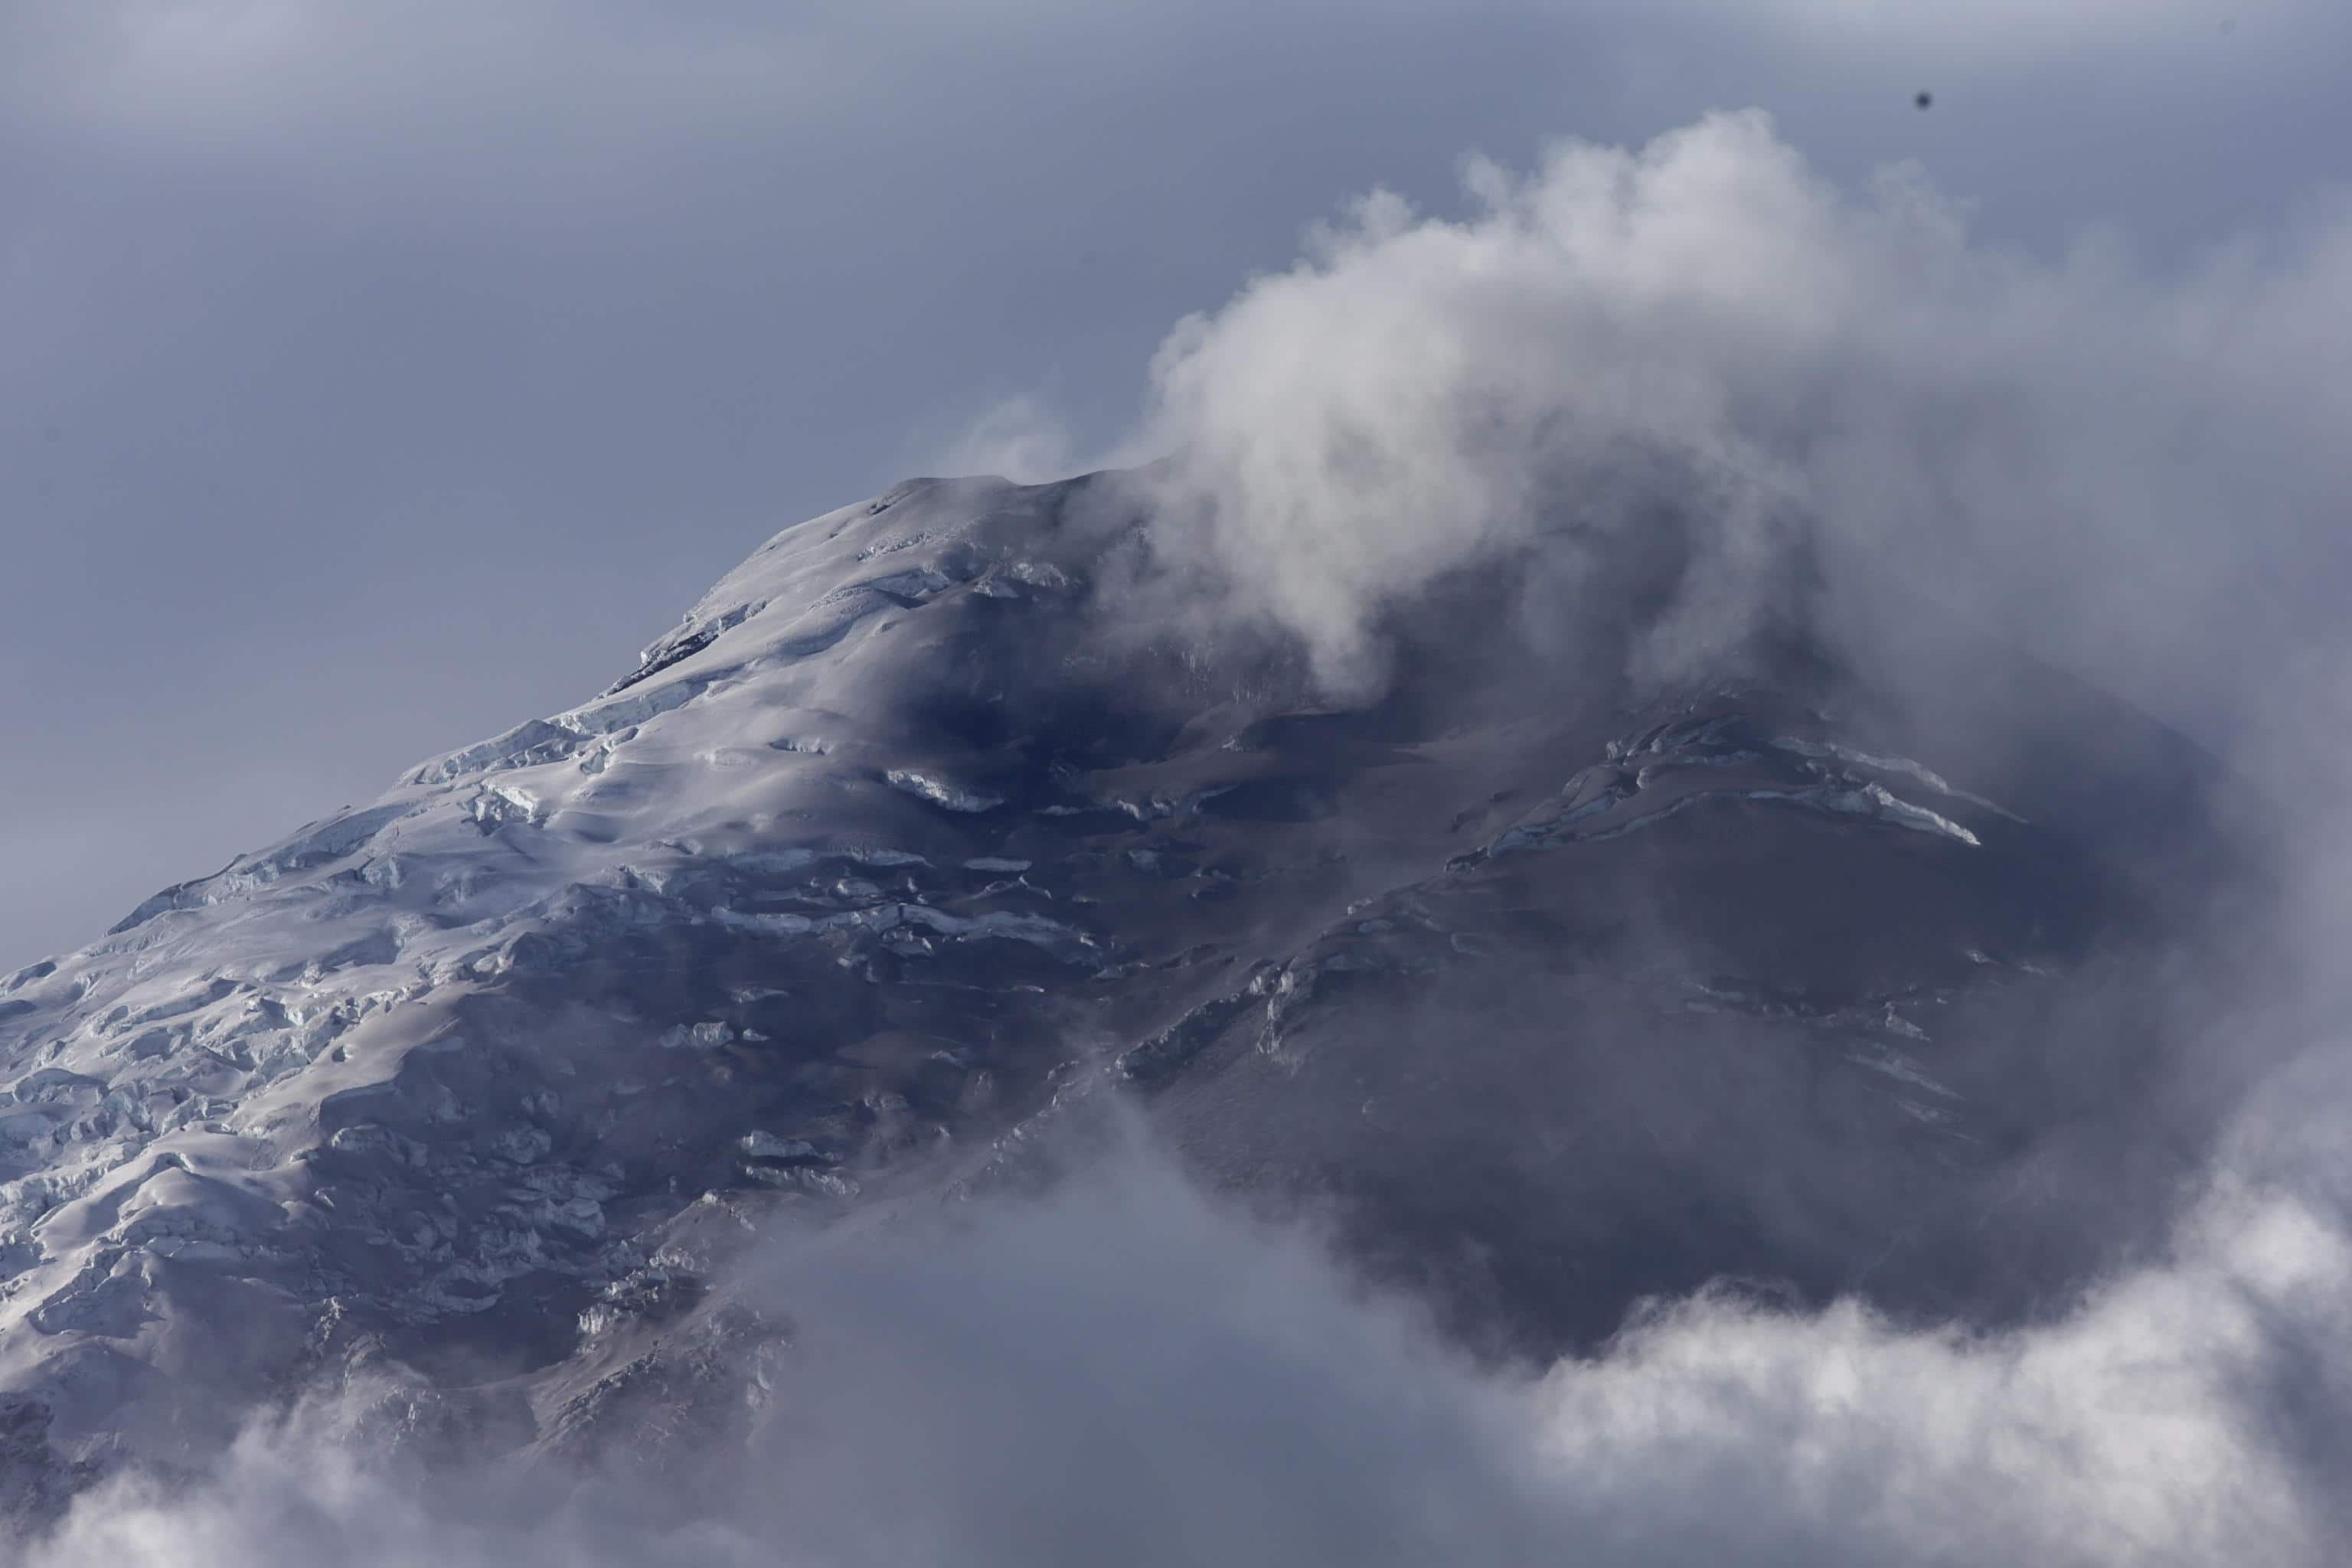 epa10330743 The Cotopaxi volcano, in the cantons of Quito and Mejia, in the province of Pichincha, Ecuador, 26 November 2022. A slight ash fall from the Cotopaxi volcano was recorded this 26 November in the Quito and Mejía cantons, in the Ecuadorian province of Pichincha, reported the National Risk and Emergency Management Service of Ecuador. In his social networks, he explained that the fall of volcanic dust was reported in the parishes of Quitumbe, Guamaní, La Merced, Amaguaña, as well as in San Juan, the Historic Center, La Mena, Chillogallo and La Ecuatoriana (south and center of Quito).  EPA/Jose Jacome